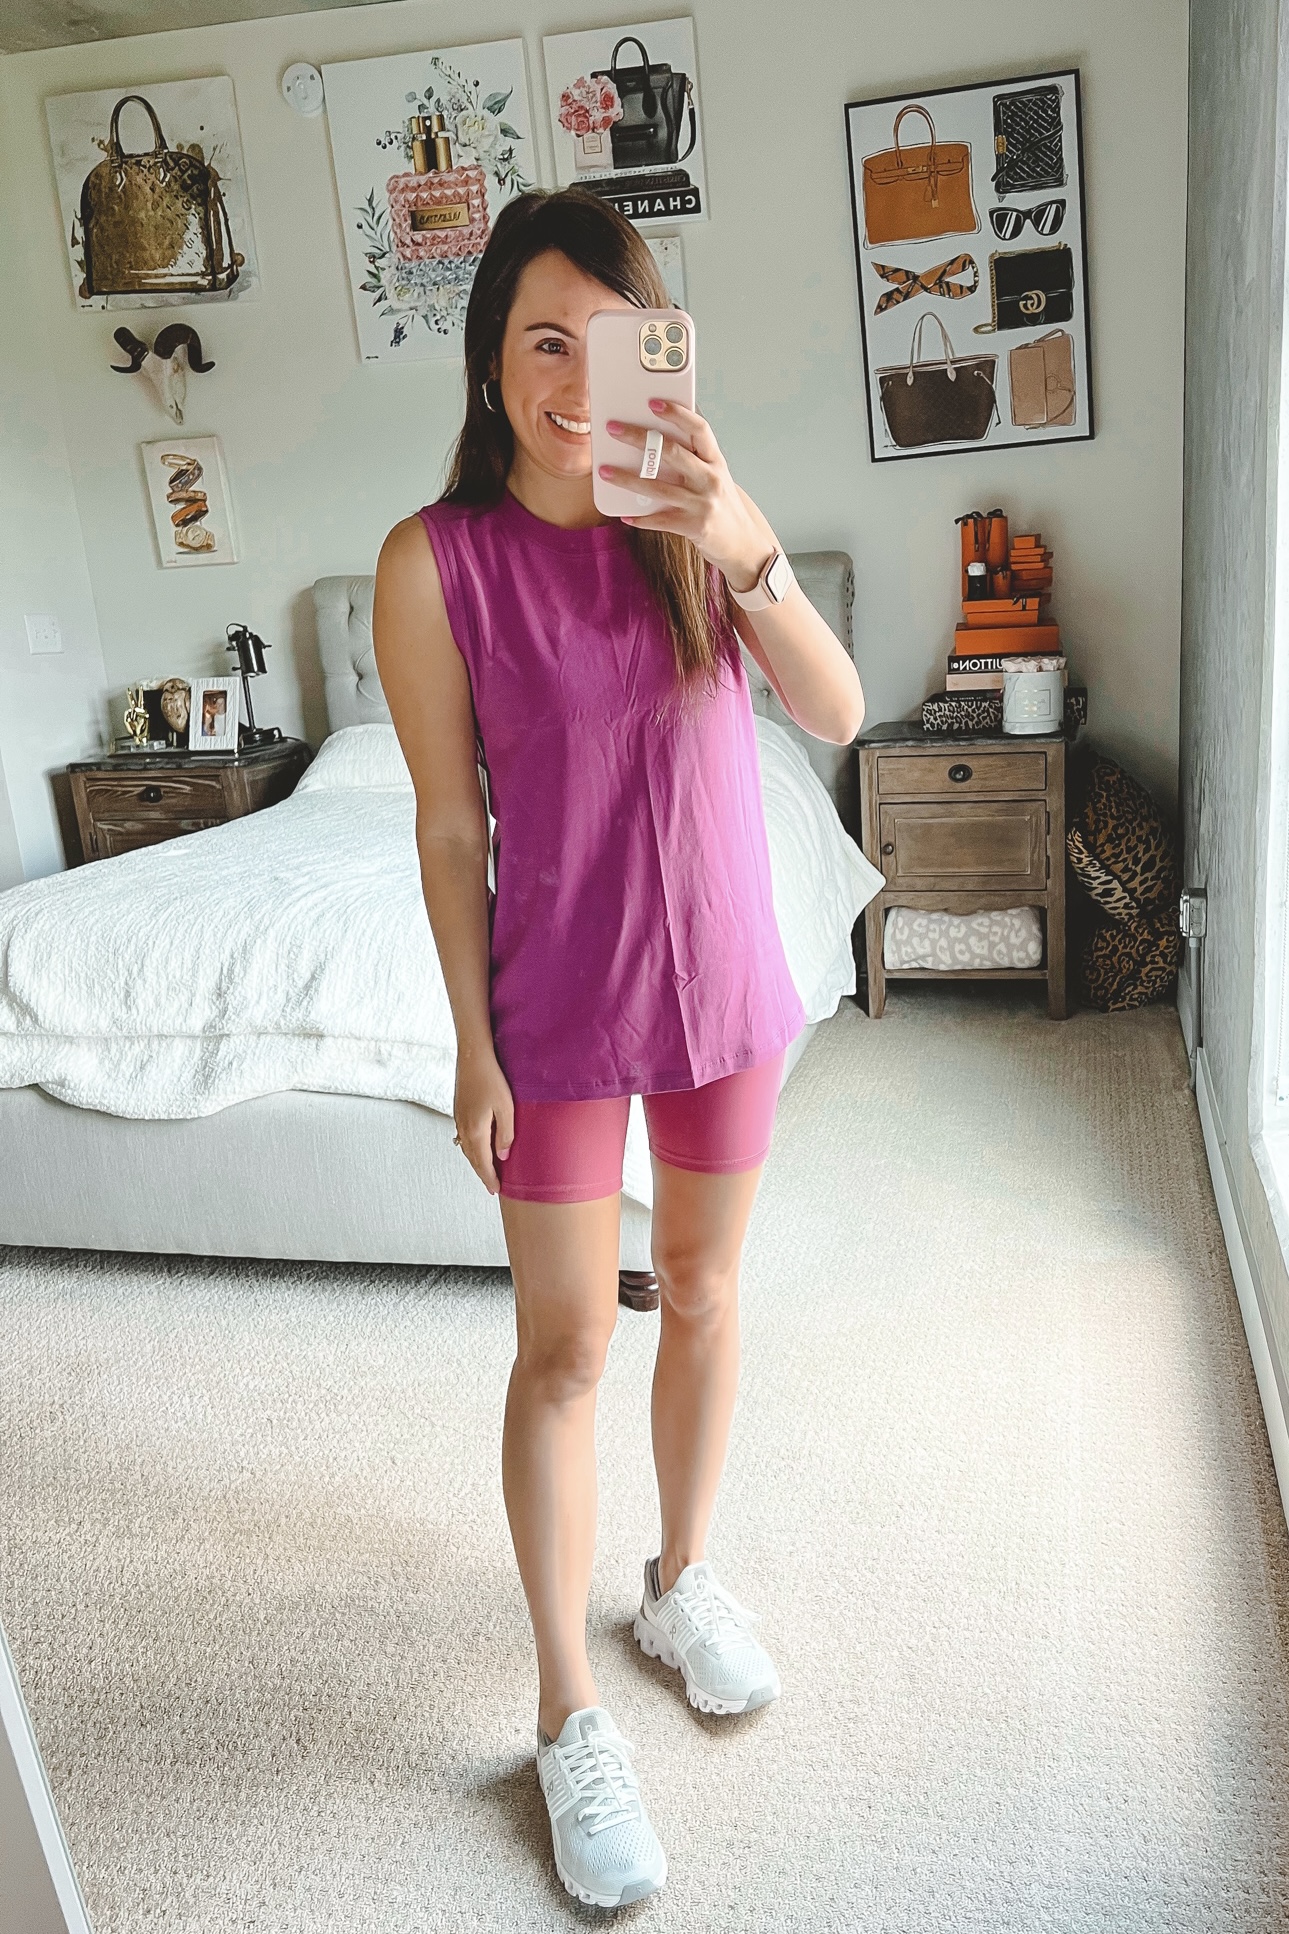 Lululemon All Yours Tank Review